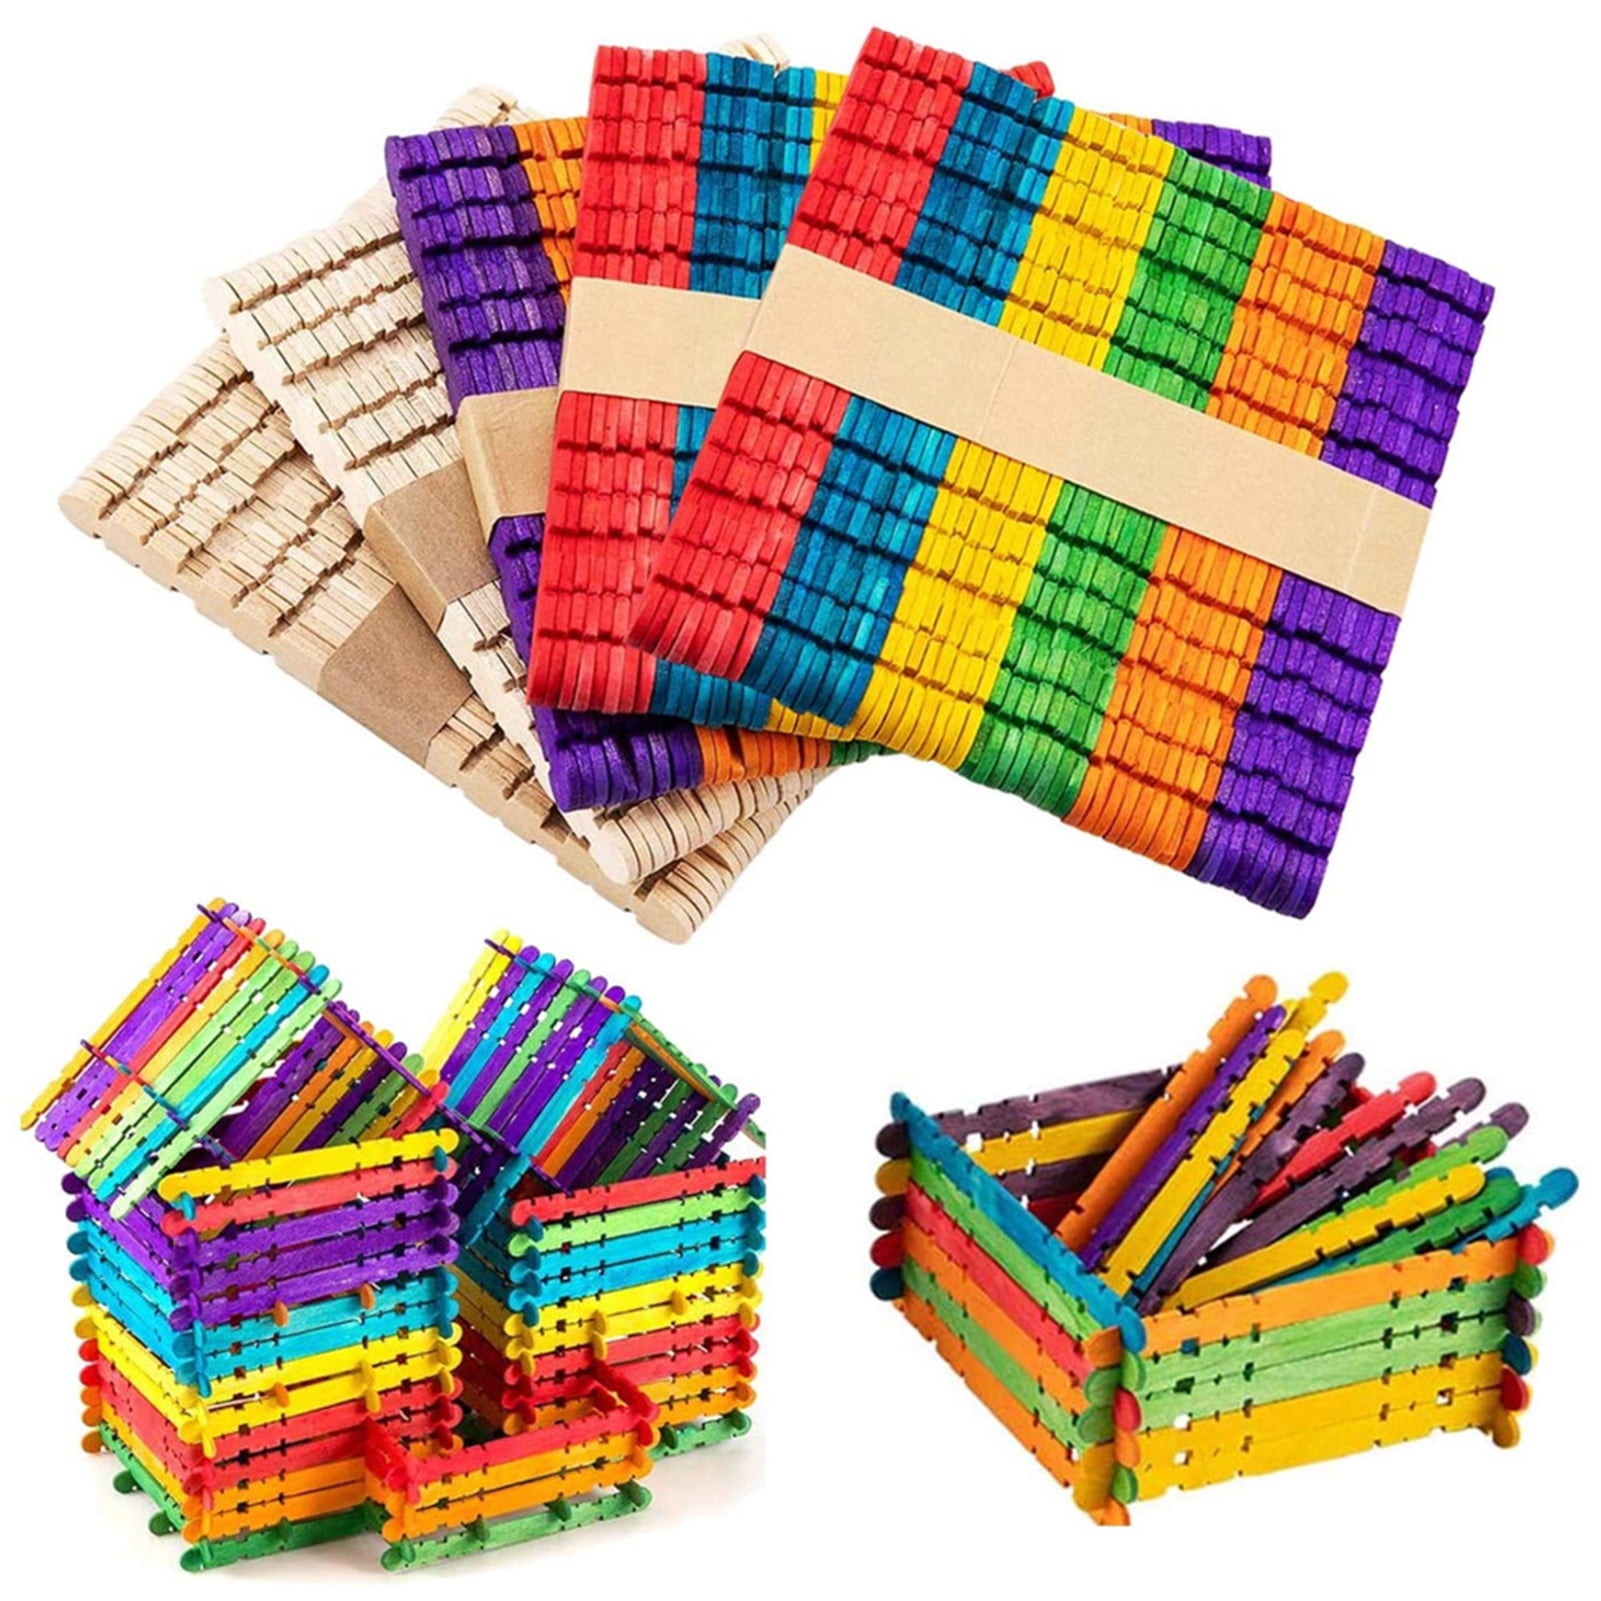 100pcs Wooden Craft Sticks, Diy And Drawing Craft Sticks For Making Your  Own Wooden Crafts! Perfect For Developing Children's Hands-on Ability,  Great For Family Art Projects, Classroom Art Supplies, Kids Birthday Gifts.